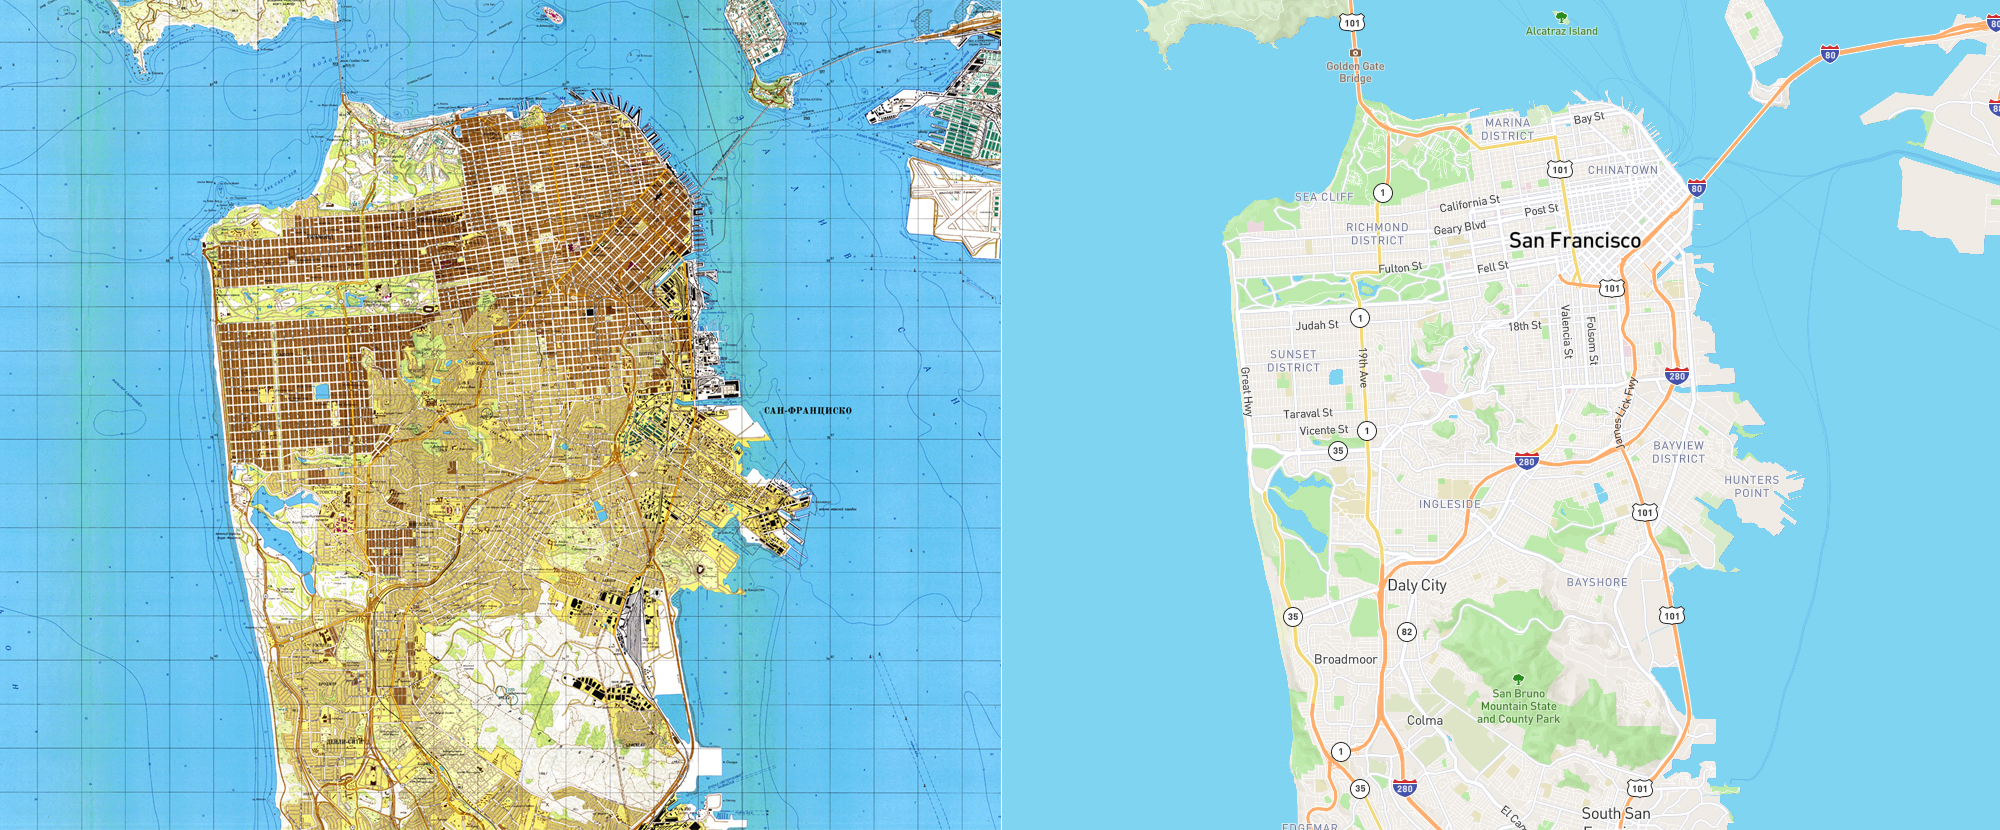 Soviet’s map of SF during Cold War, compared to today’s map